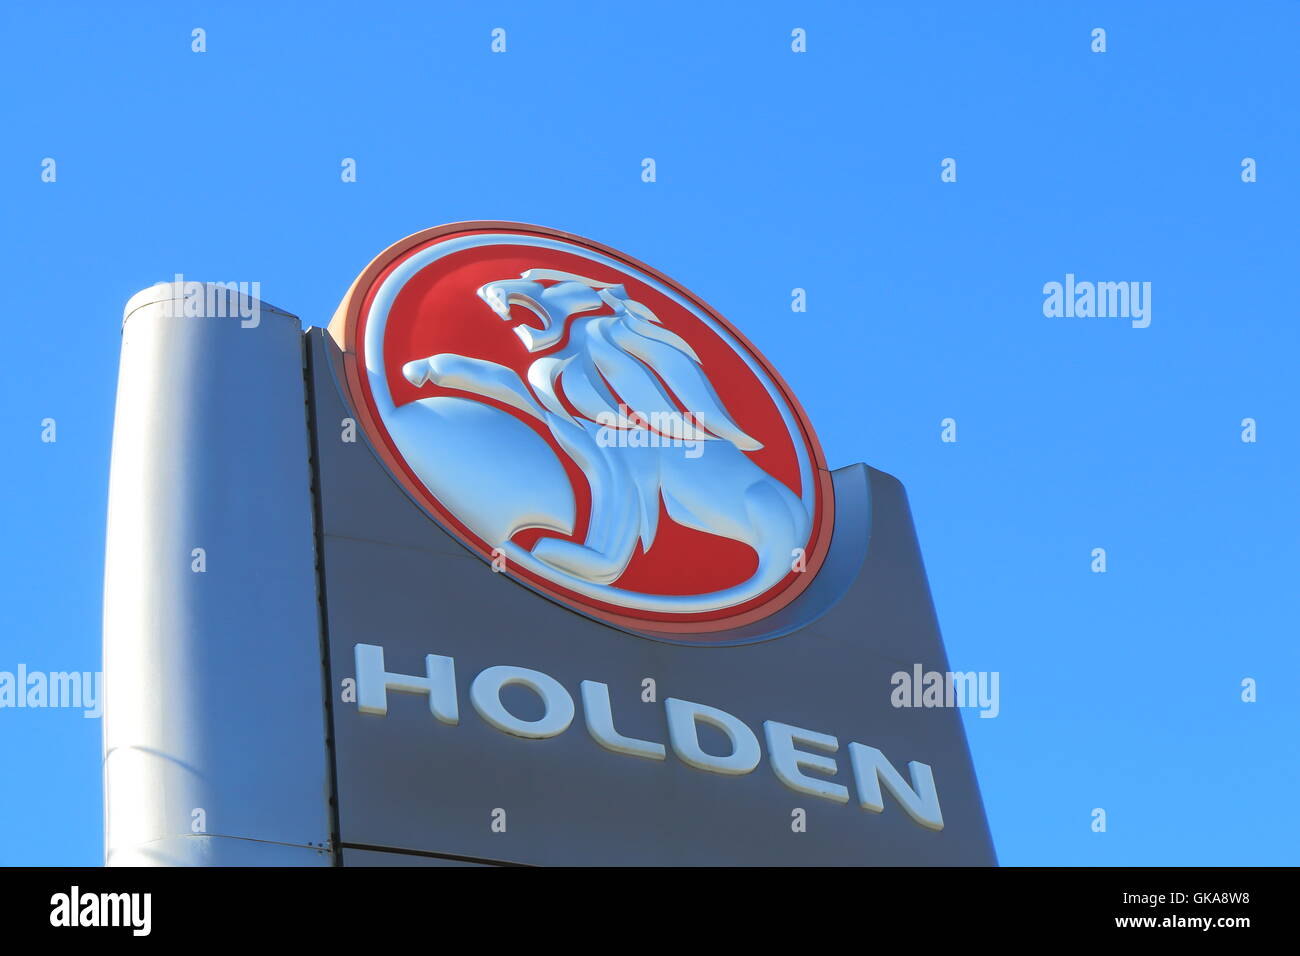 Holden Car manufacture logo, Australian automaker operates in Australia founded in 1856 as a saddlery manufacture. Stock Photo